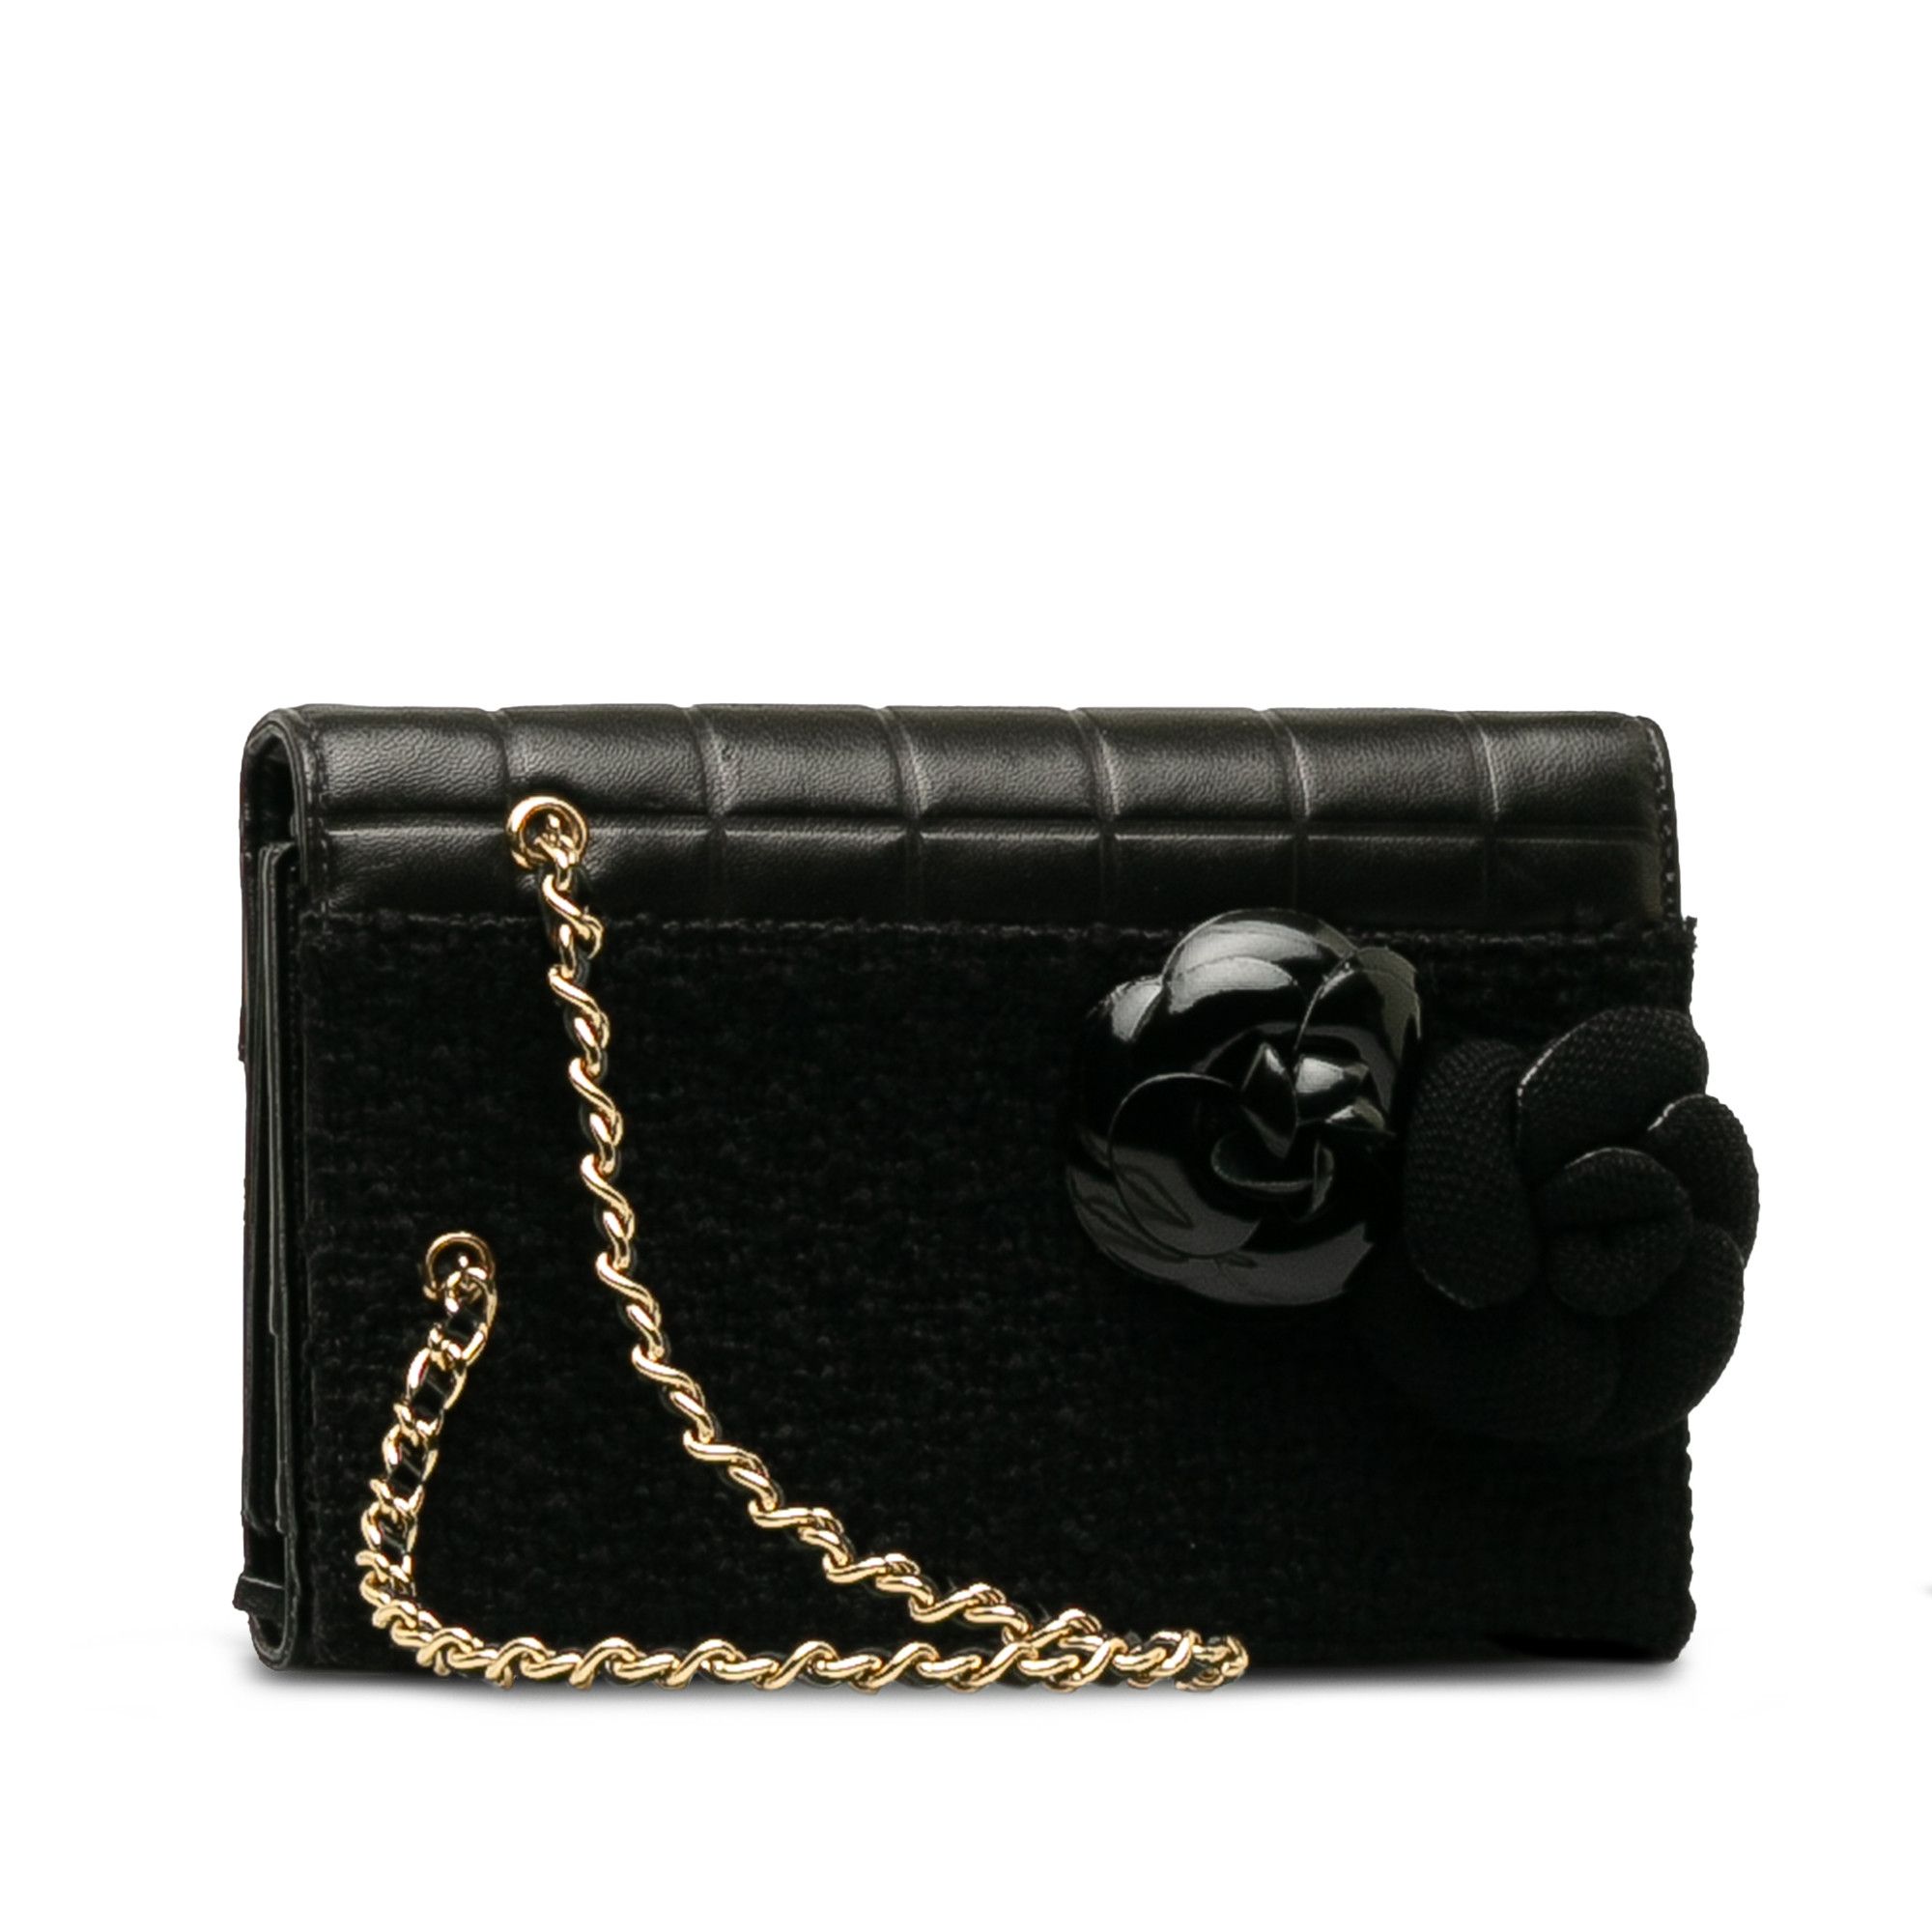 Chanel Chanel Tweed Chocolate Bar Camellia Clutch Size ONE SIZE - 2 Preview